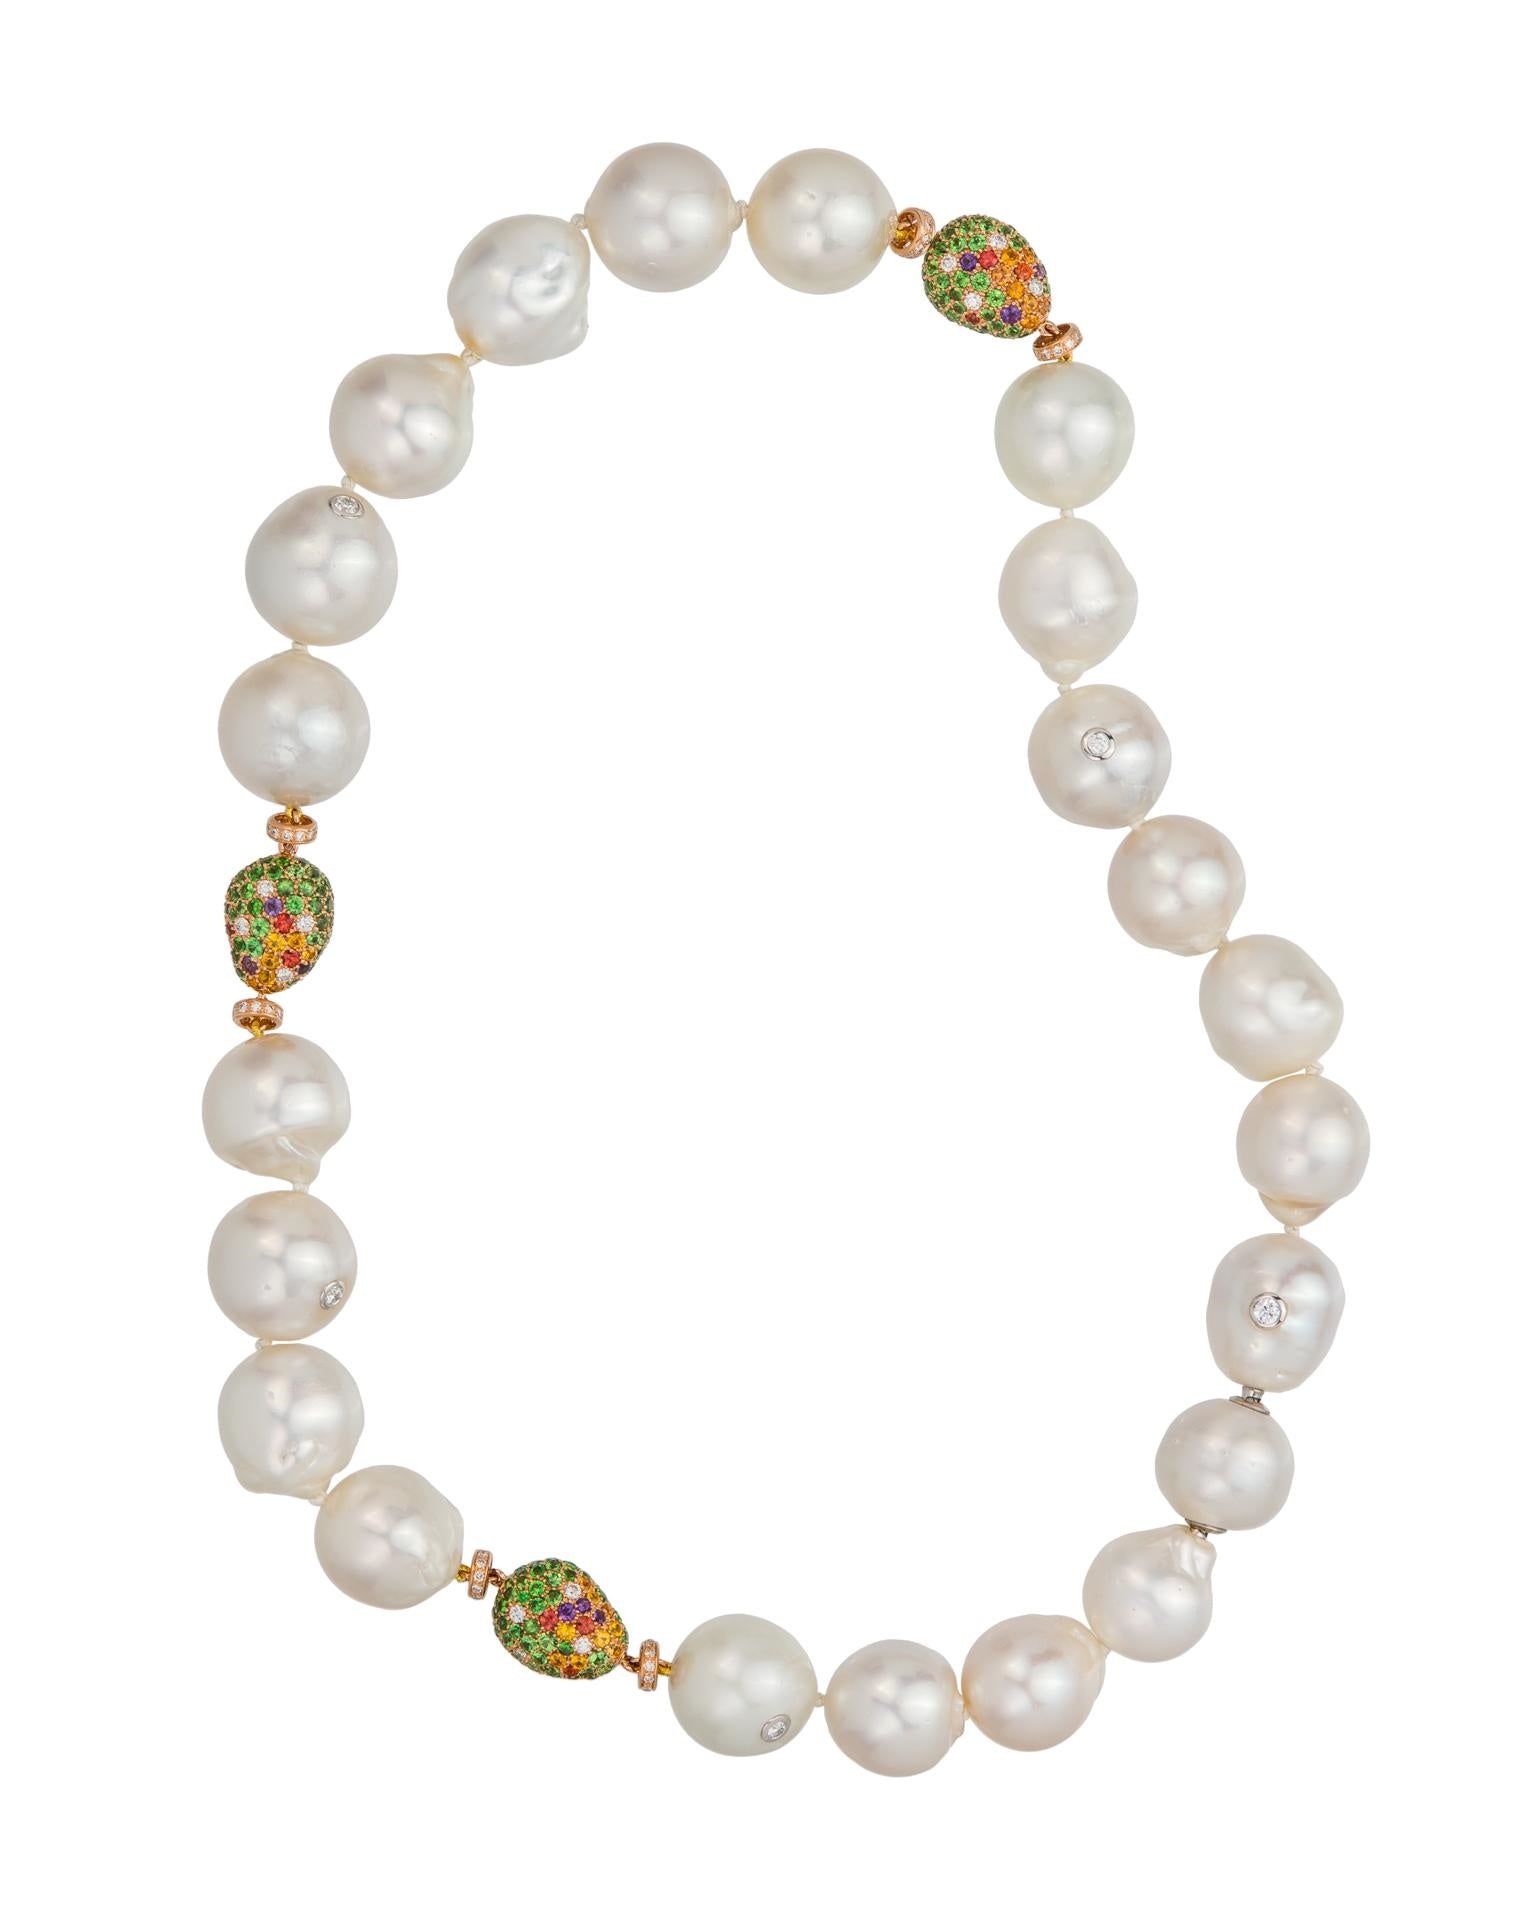 Australian South Sea pearl strand with three 'pebbles' pave set with a myriad of gemstones and a hidden bayonet clasp, crafted in 18 karat rose gold.